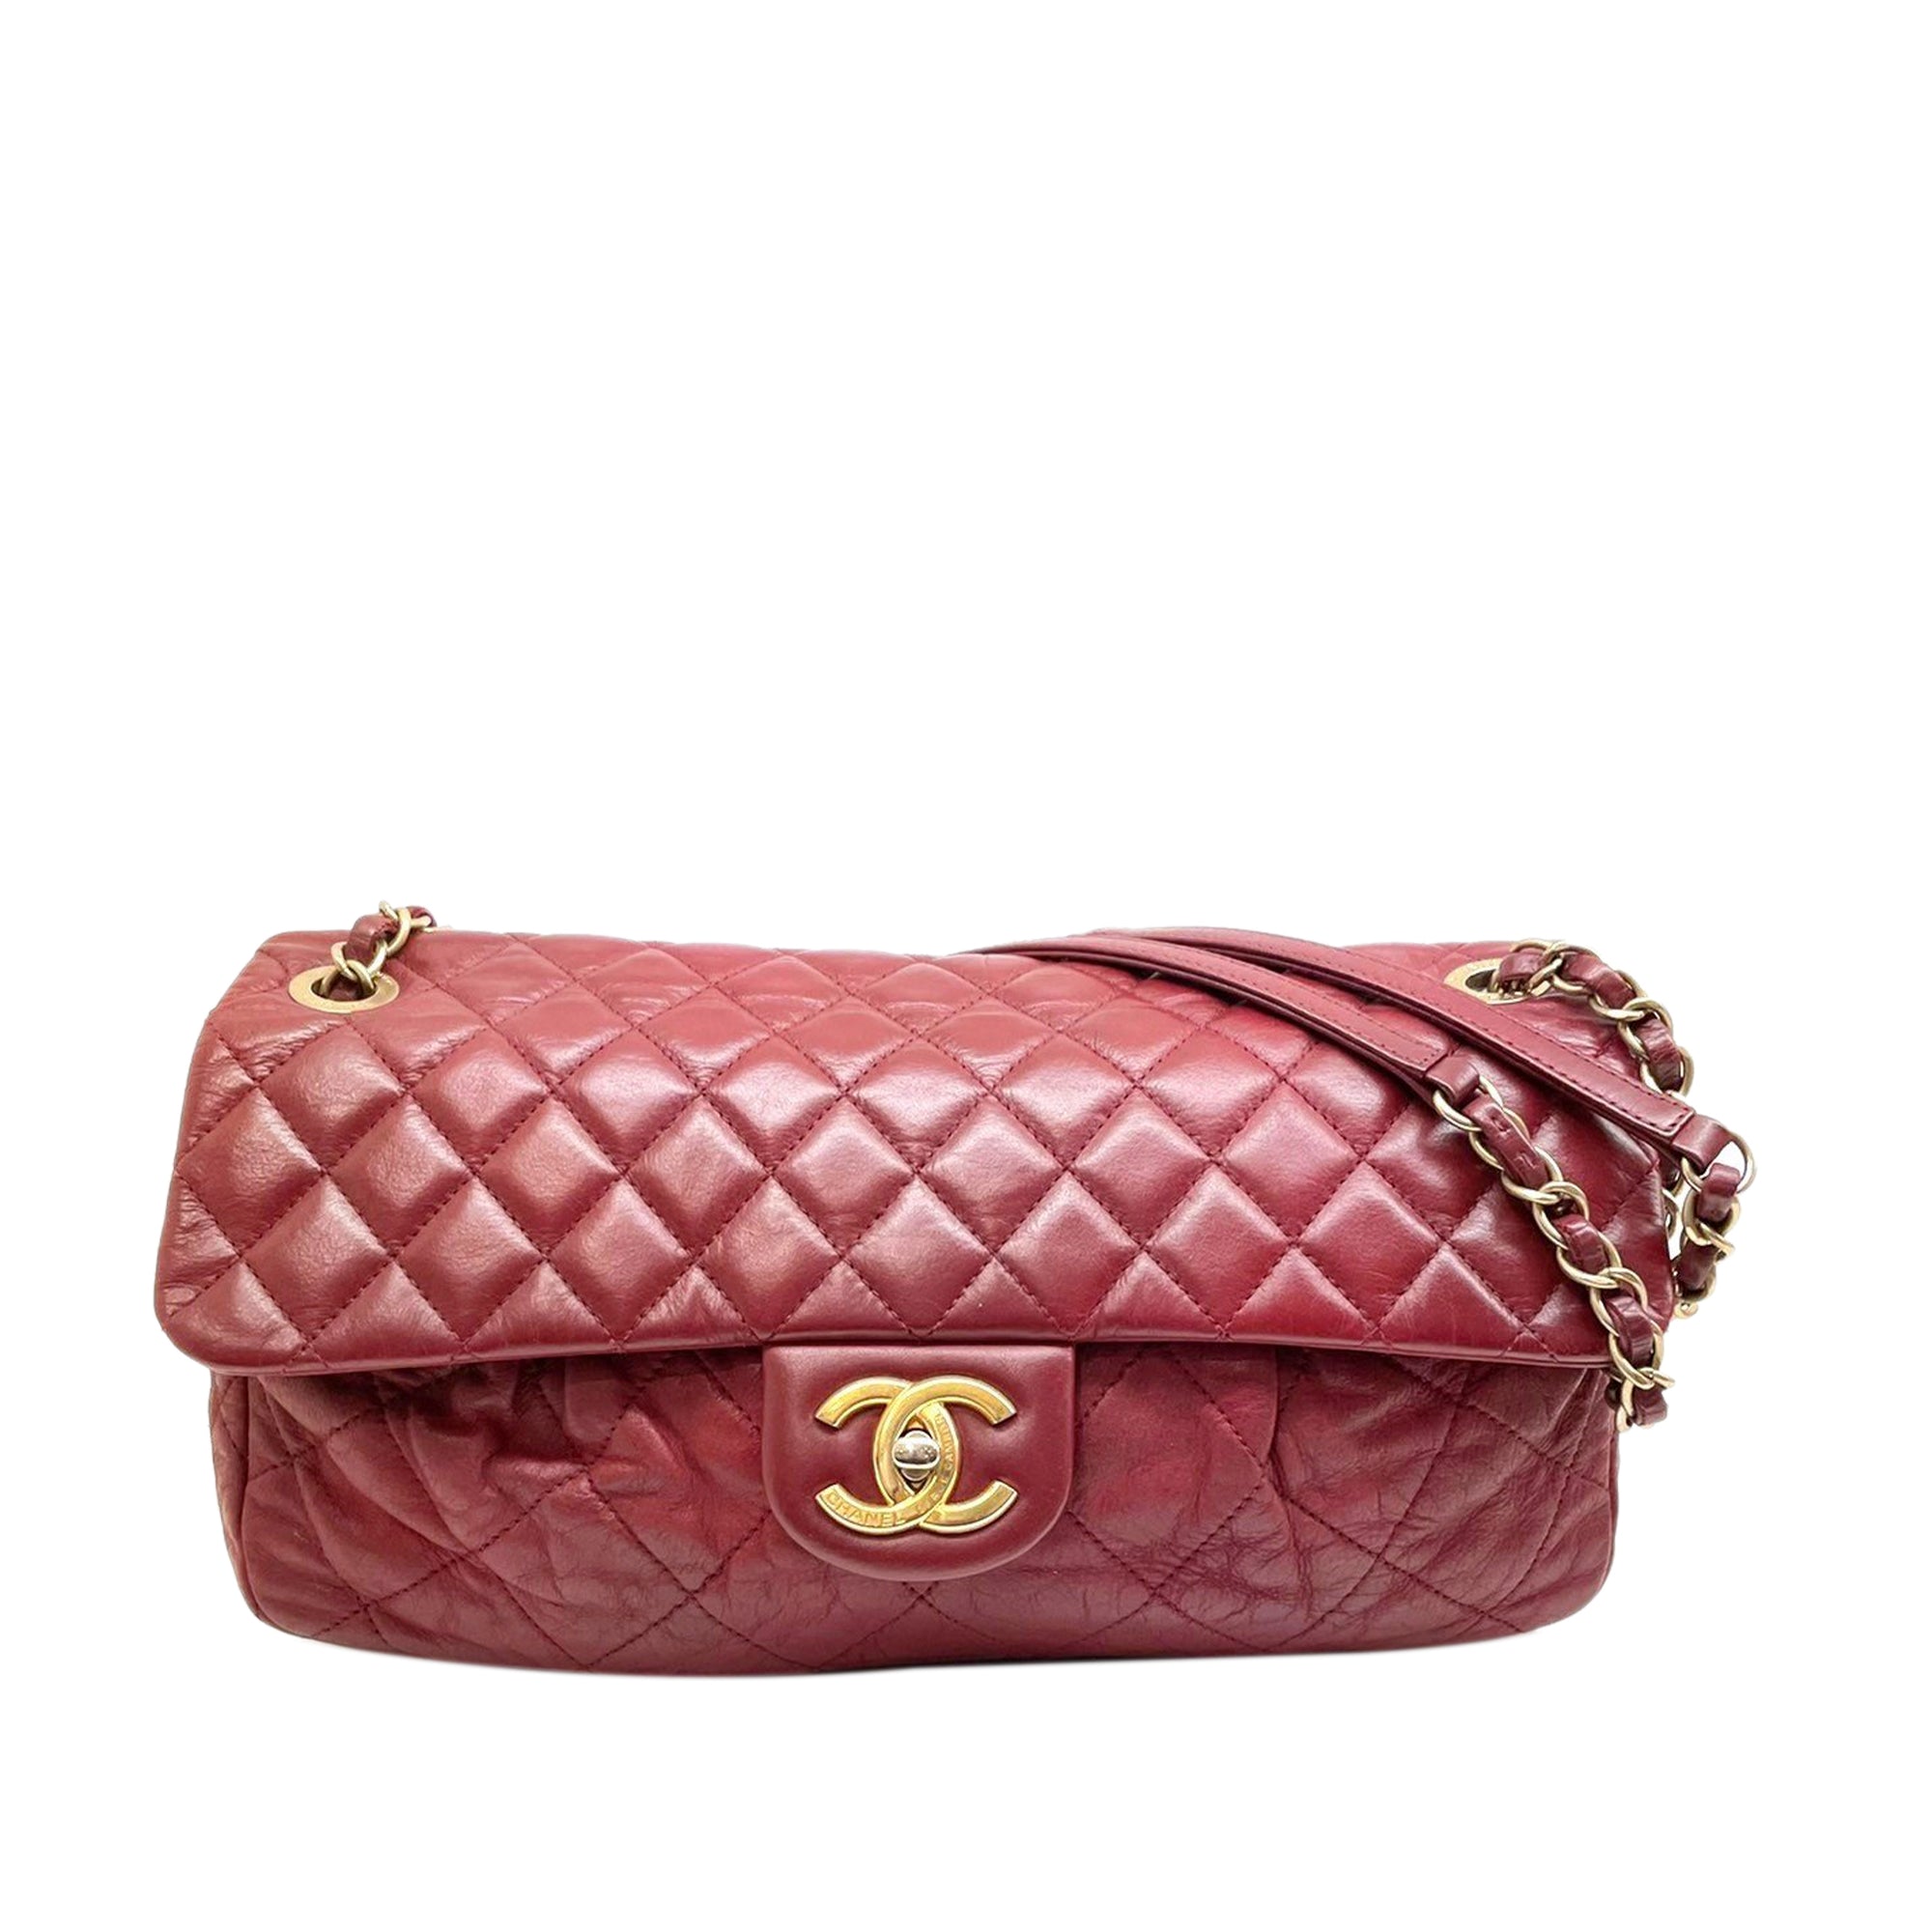 small chanel red bag